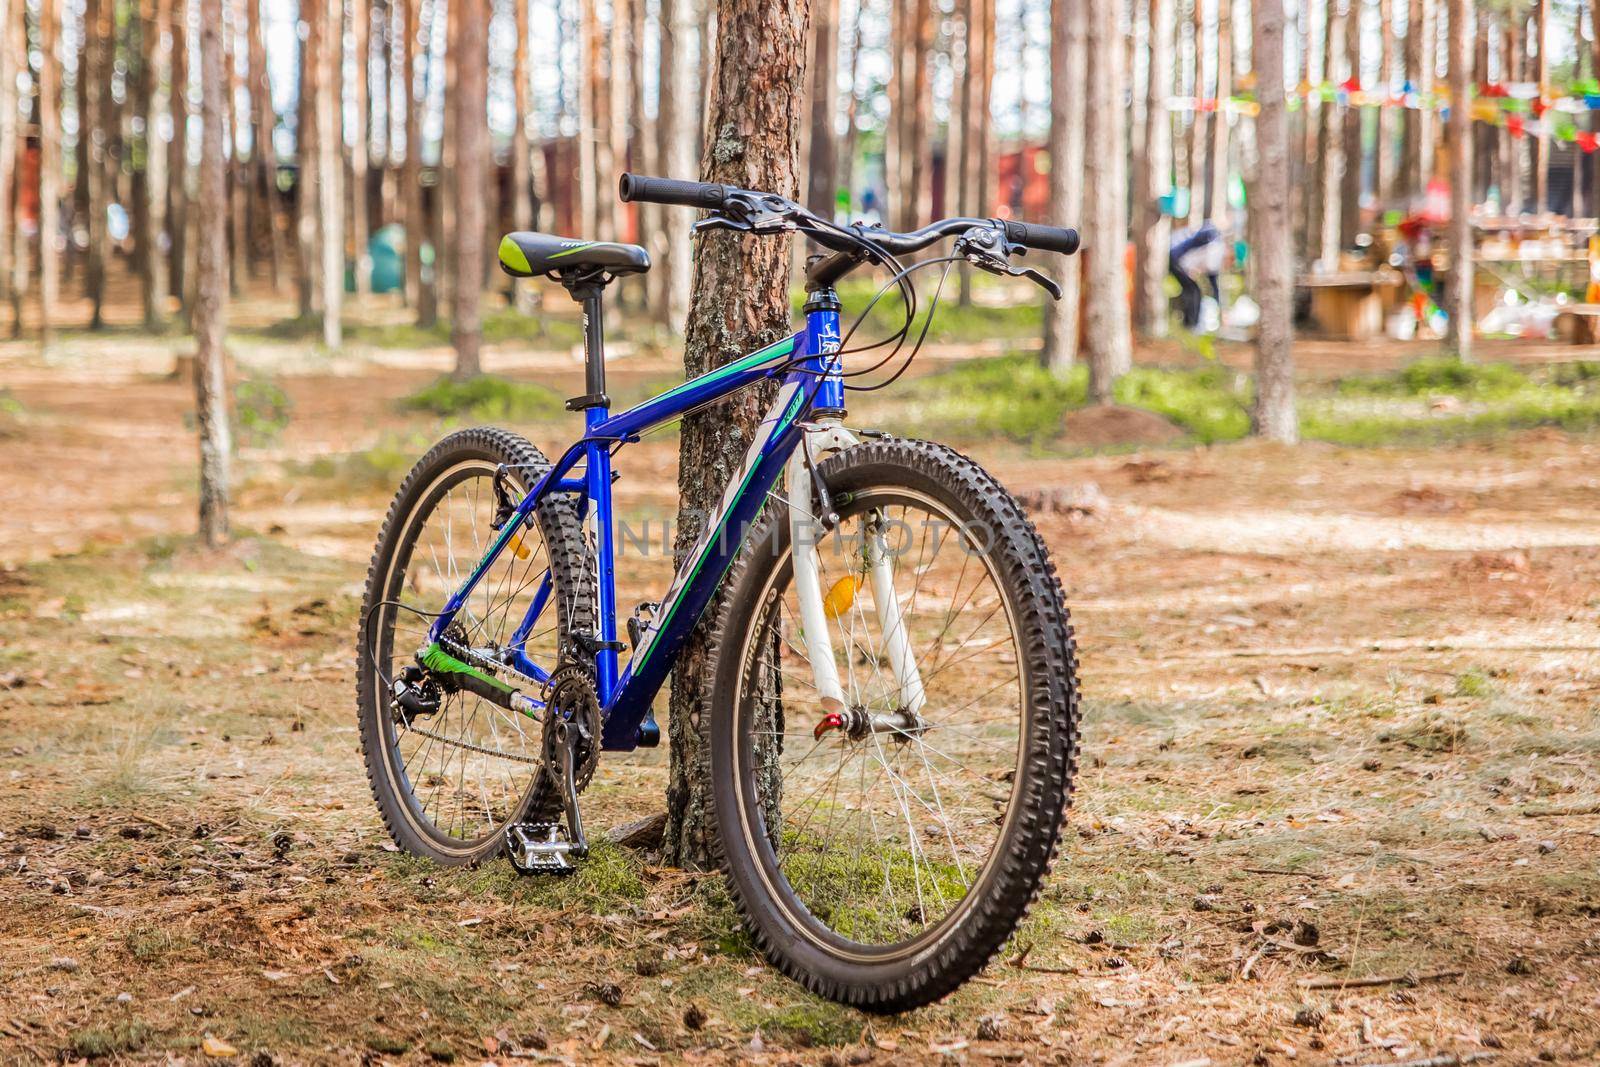 Belarus, Minsk Region - June 29, 2019: A blue bicycle without a man stands by a tree on a background of forest nature by AYDO8